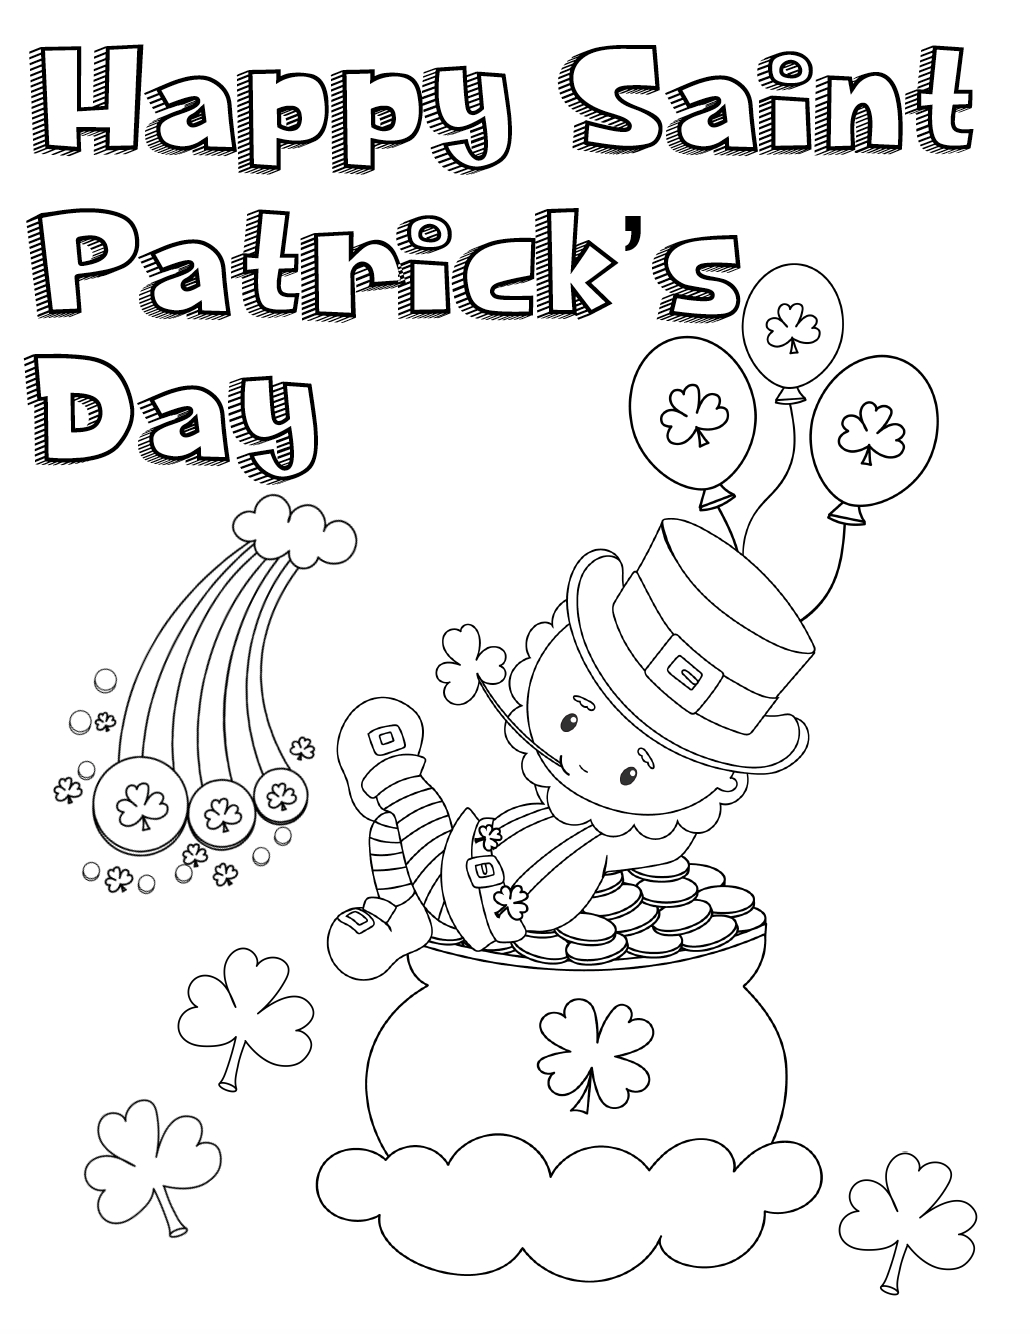 Free Printable St. Patrick&amp;#039;s Day Coloring Pages: 4 Designs! - Free Printable Saint Patrick Coloring Pages